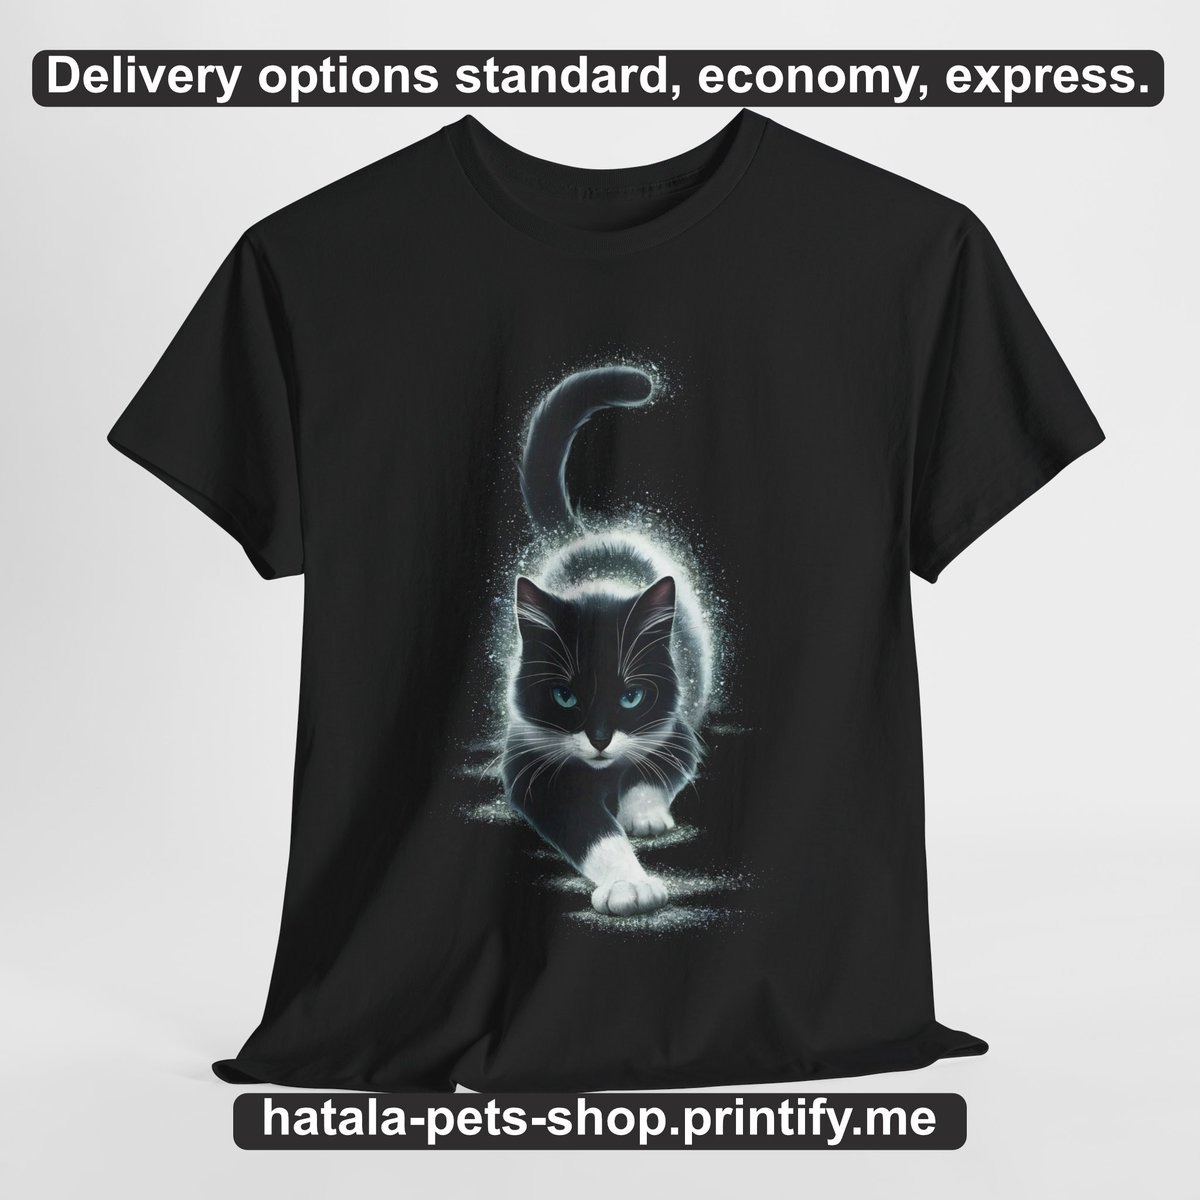 Perfect t-shirts for You and Your Friends!
Order now ➡️ hatala-pets-shop.printify.me/product/809747…
#catskills #catsrule #catsofthew
#cats #catsofinstagram #catstagram #catsagram #catsofig #catsofworld #CatsOfInsta #catslover #catsoninstagram #catslife #catsgram #catselfie #catslovers #catsoftheday